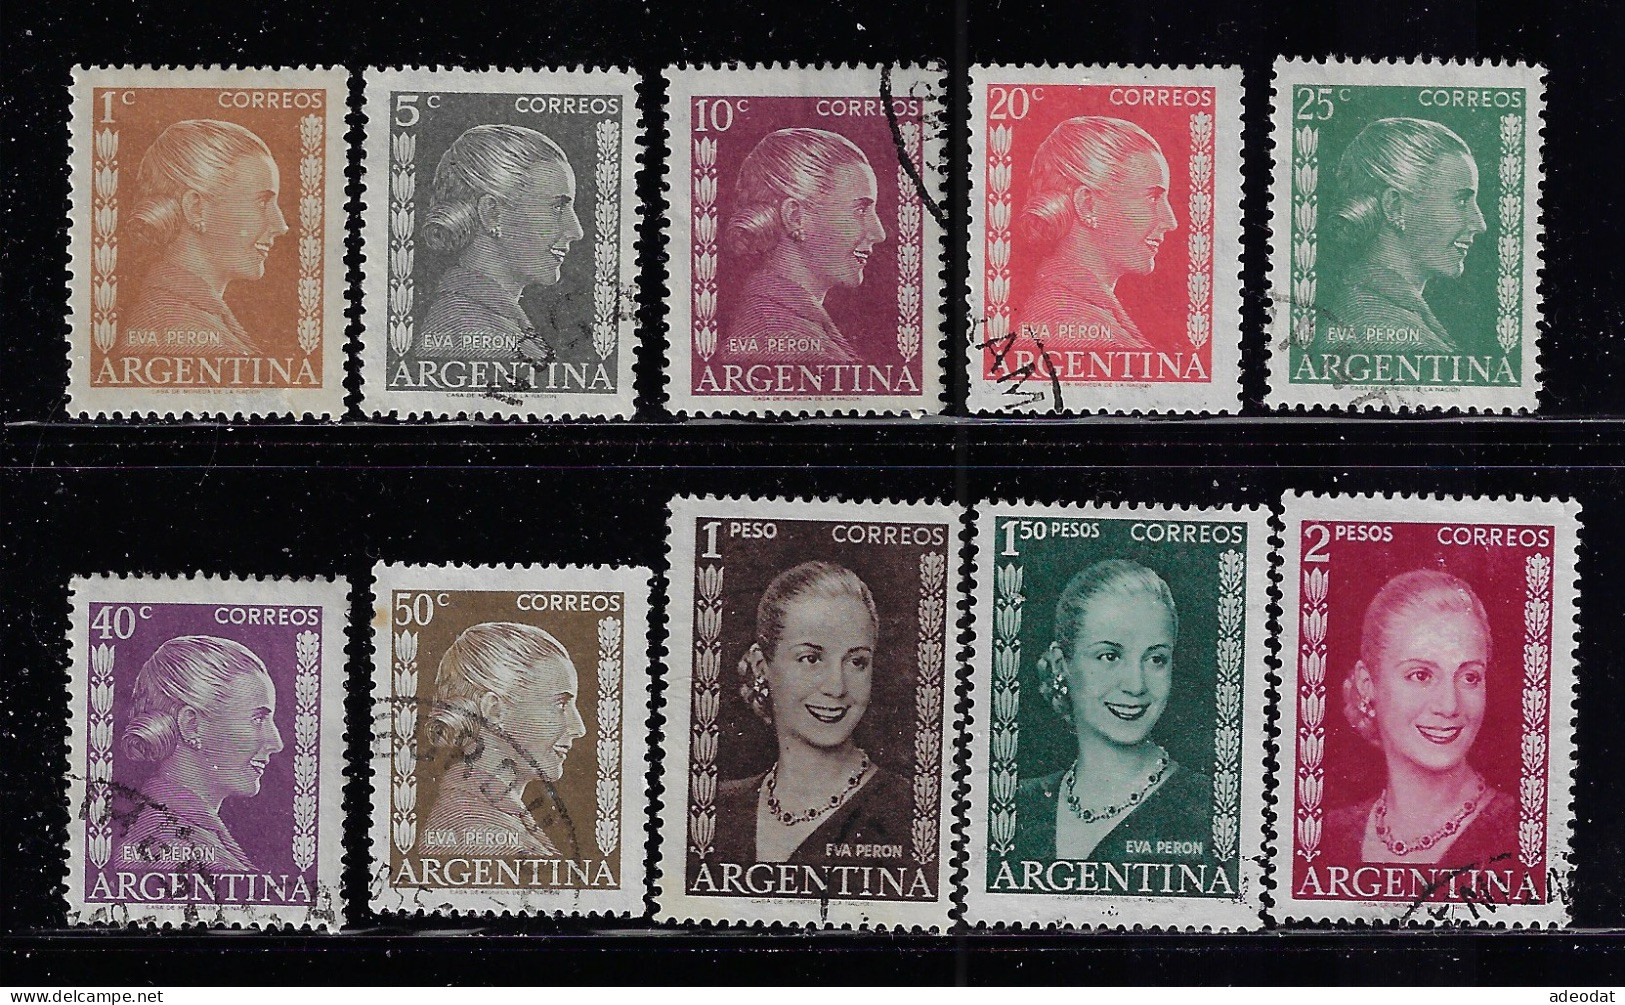 ARGENTINA  1952  SCOTT #599-604,606,611-613  USED - Used Stamps